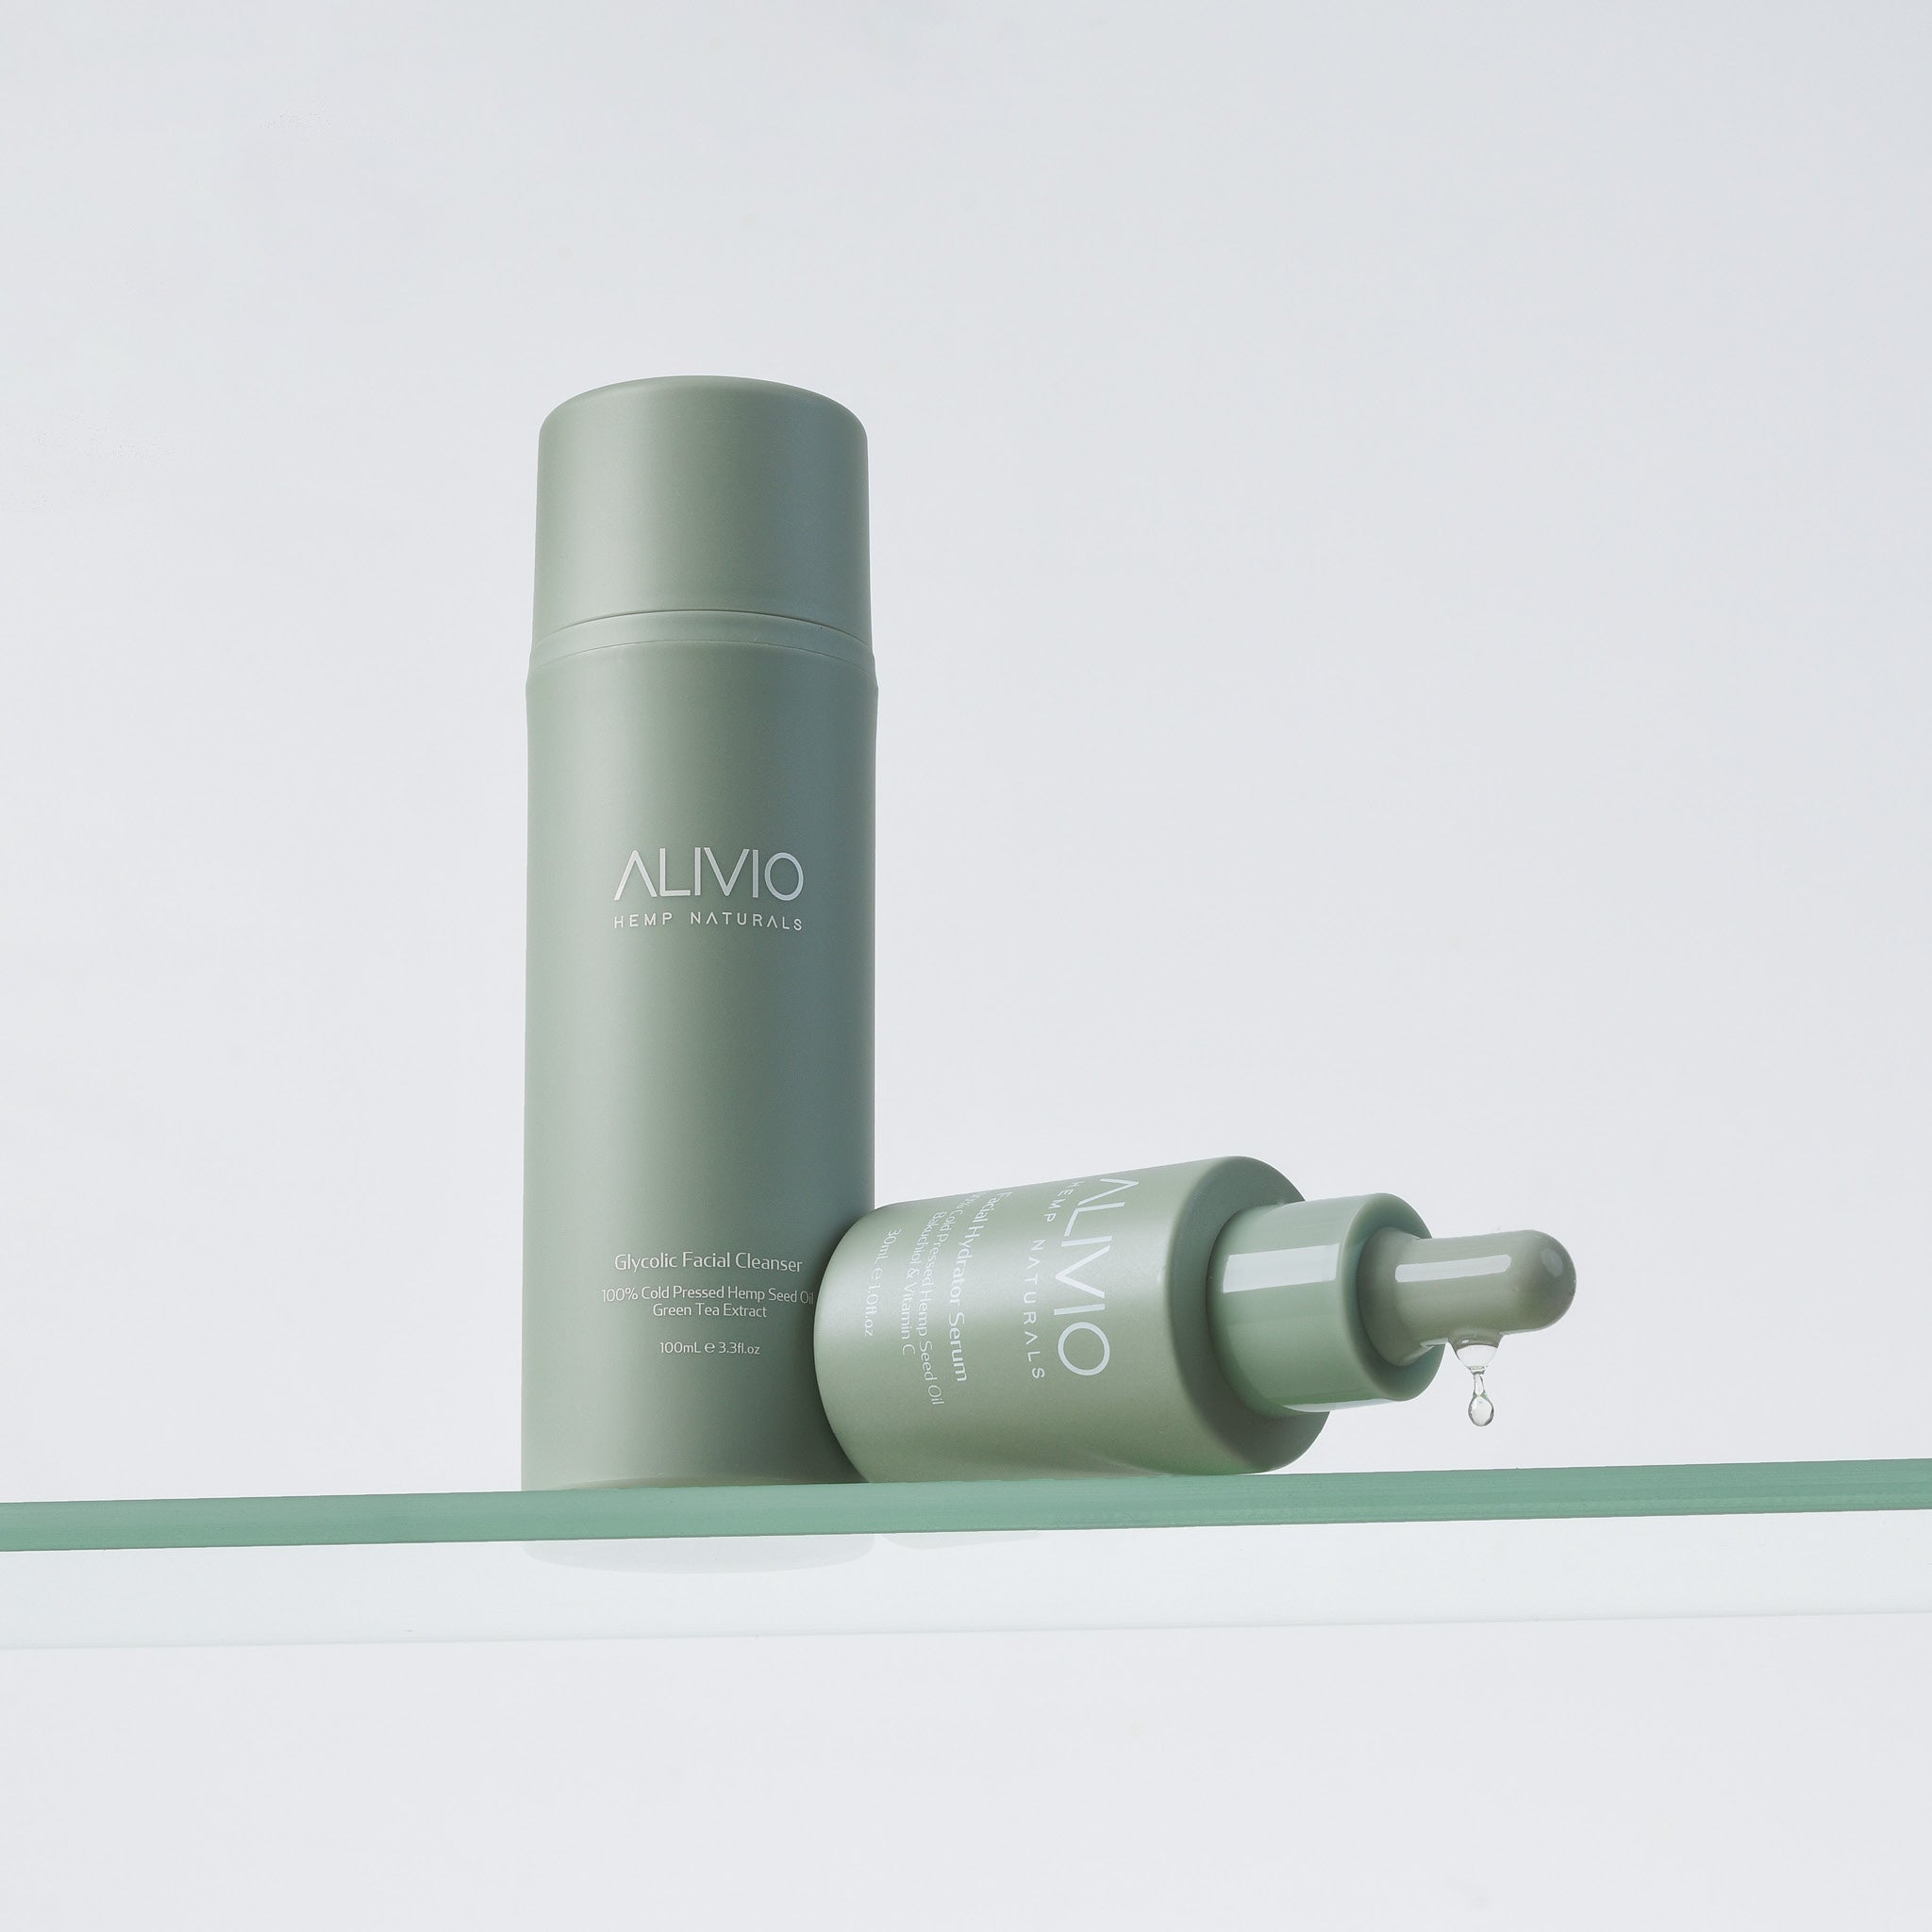 Alivio Wellness Cleanse & Hydrate Bundle featuring Glycolic Facial Cleanser for gentle exfoliation and Hydrating Facial Serum for deep moisturization and a radiant complexion.